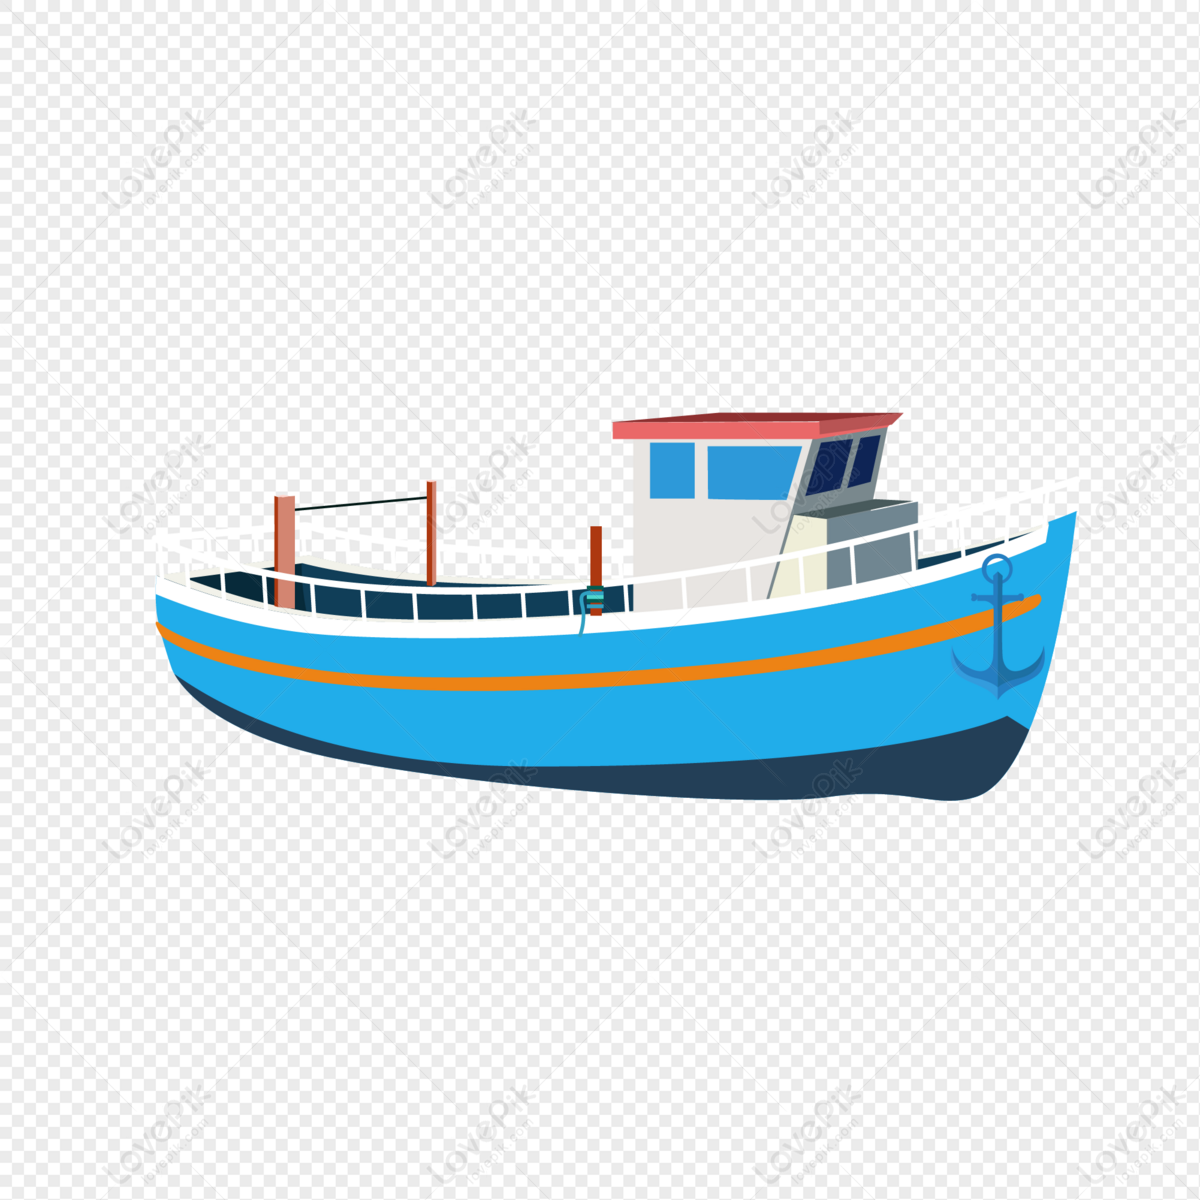 Fishing boat, fish, fishing boat, boat pictures png free download